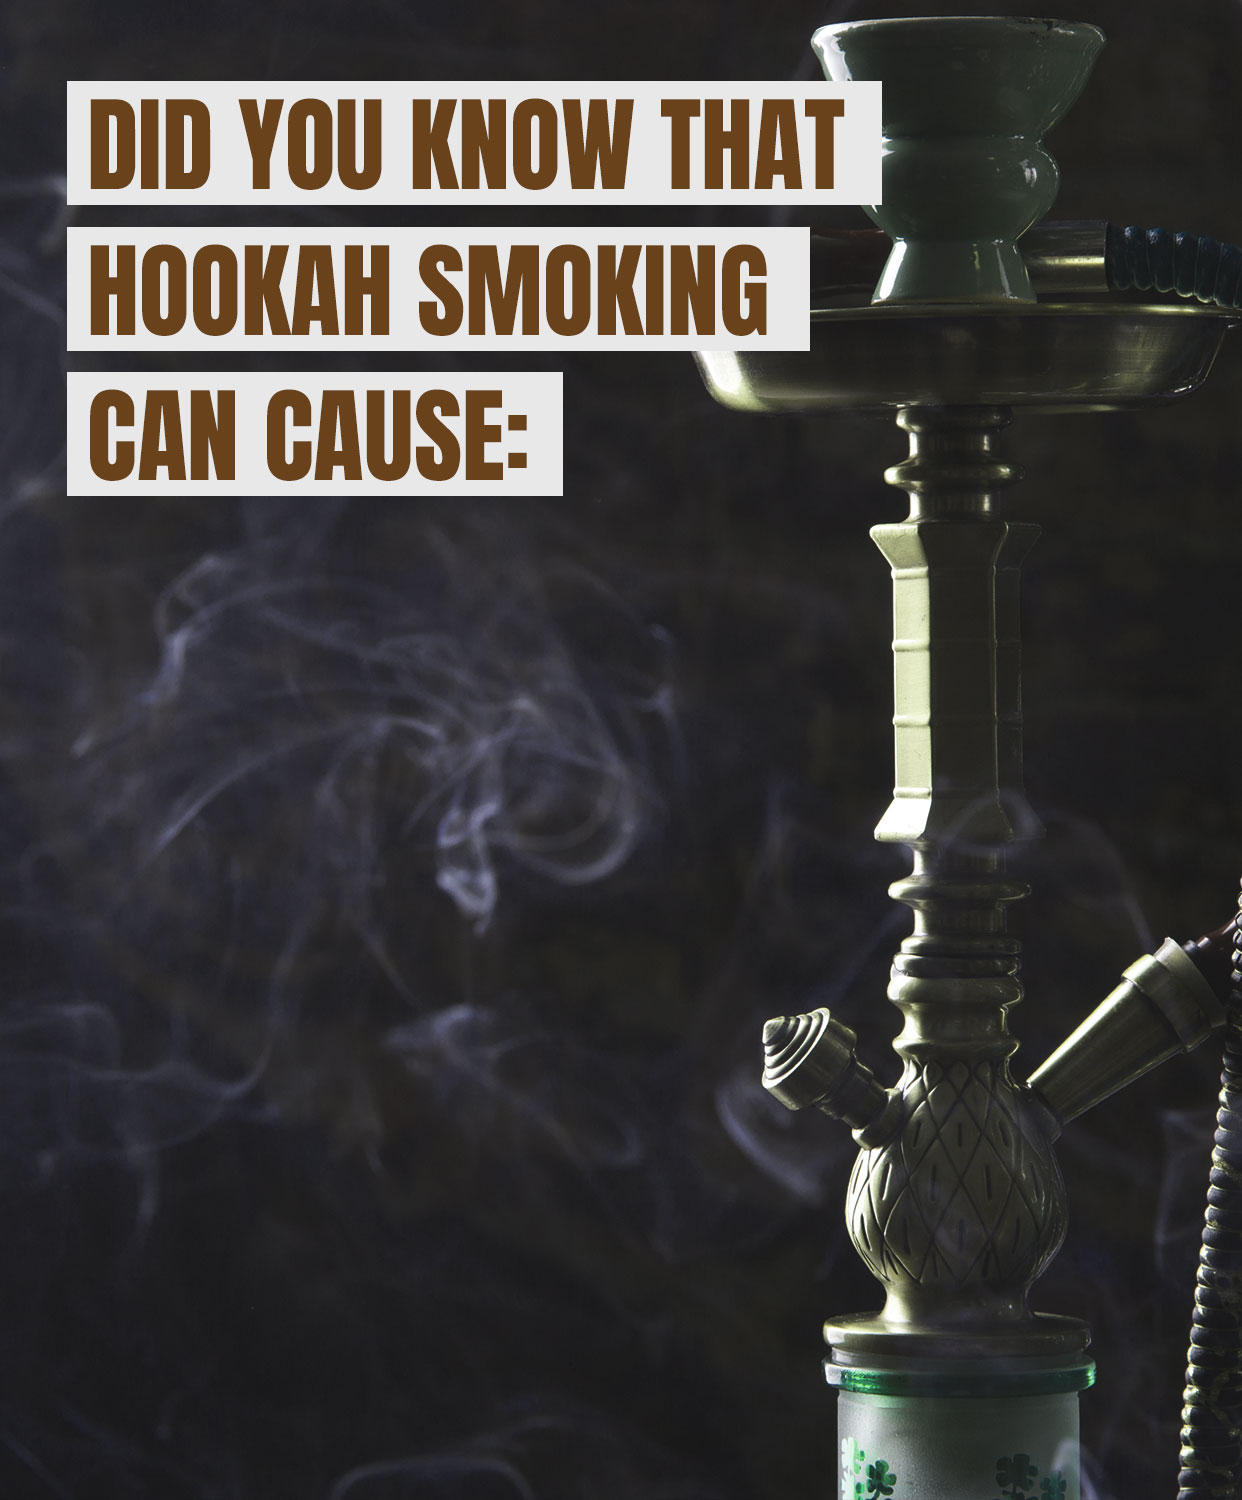 Did you know that hookah smoking can cause?